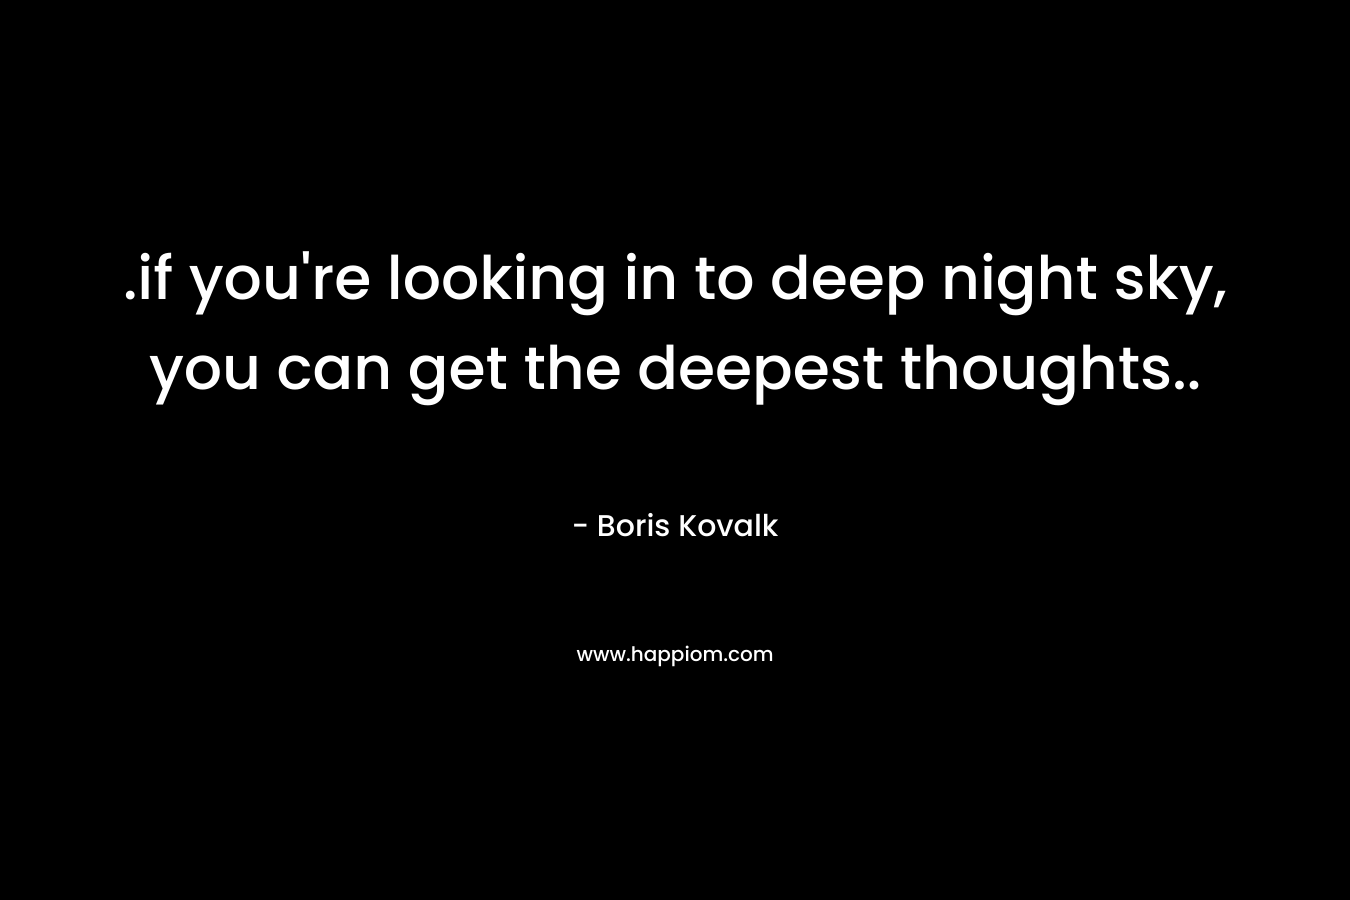 .if you're looking in to deep night sky, you can get the deepest thoughts..